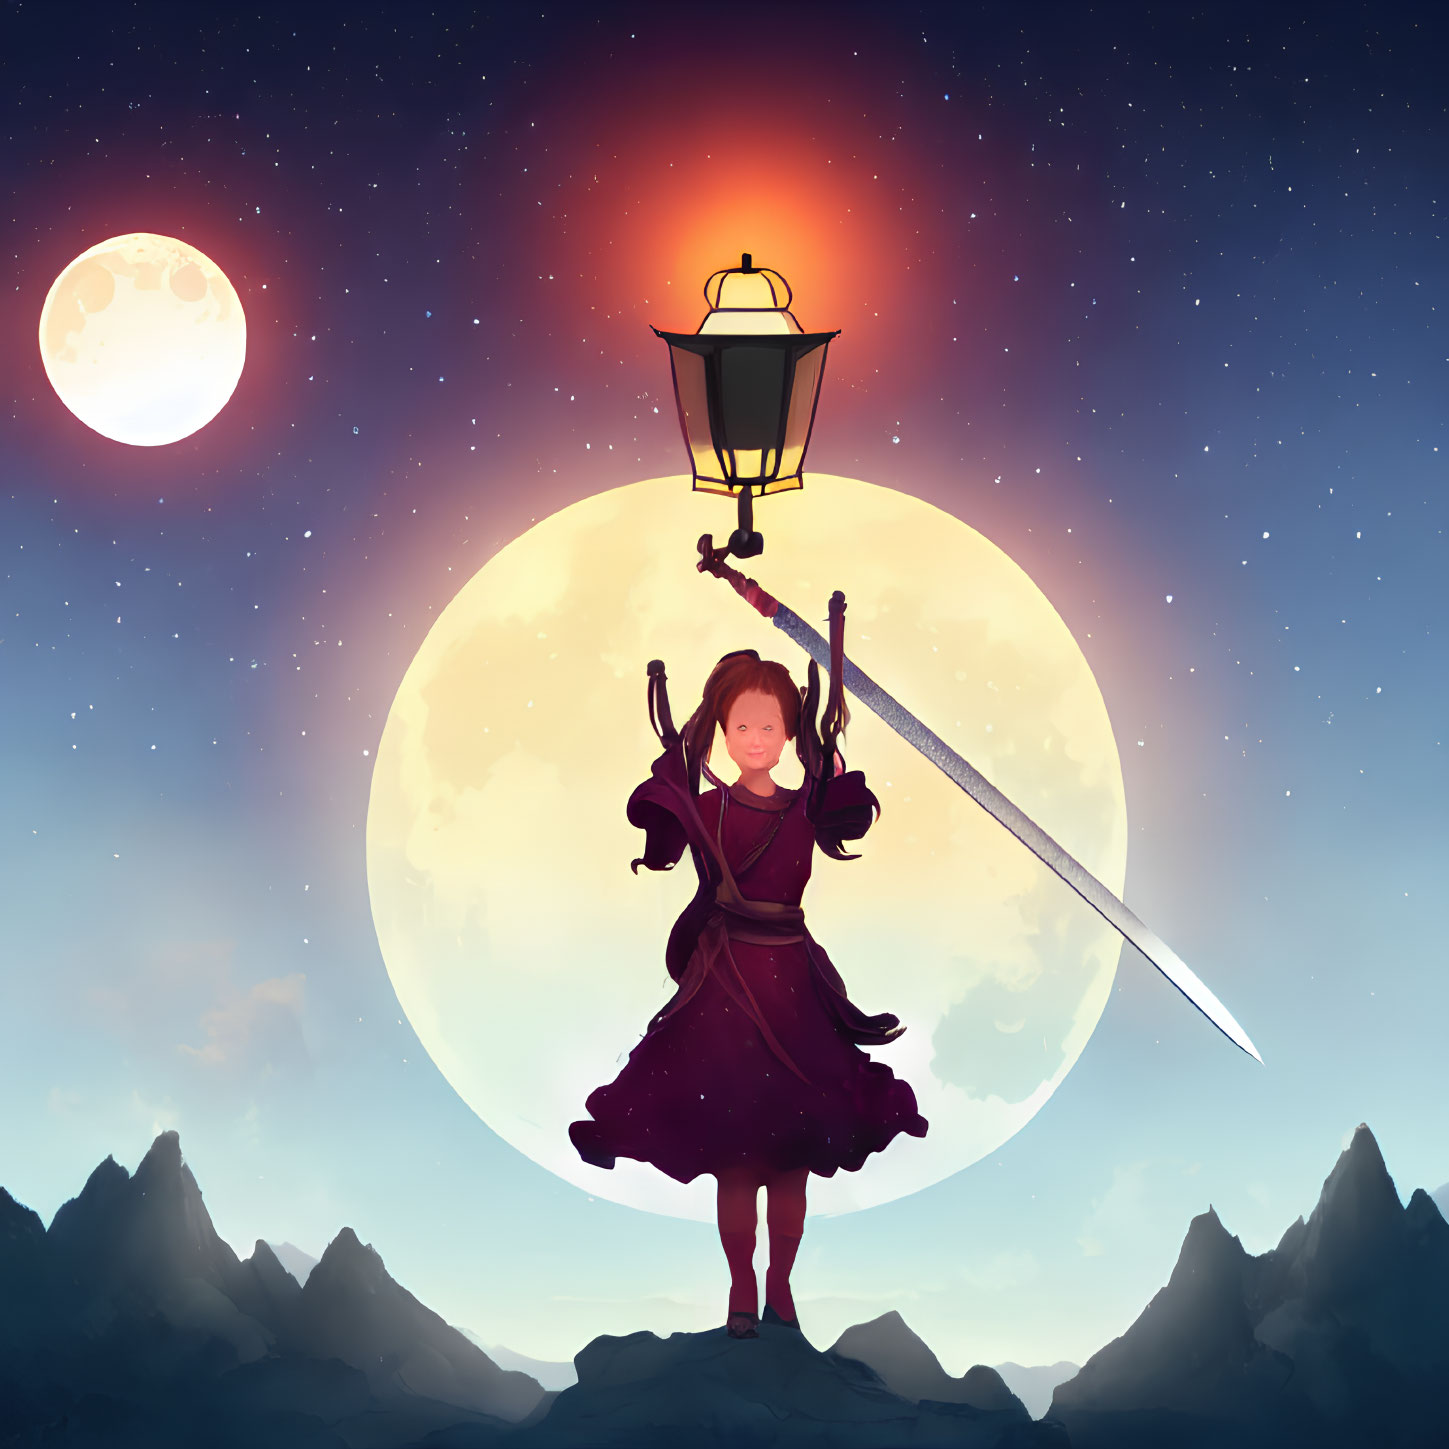 Young girl with sword and lantern under full moon and sunset sky